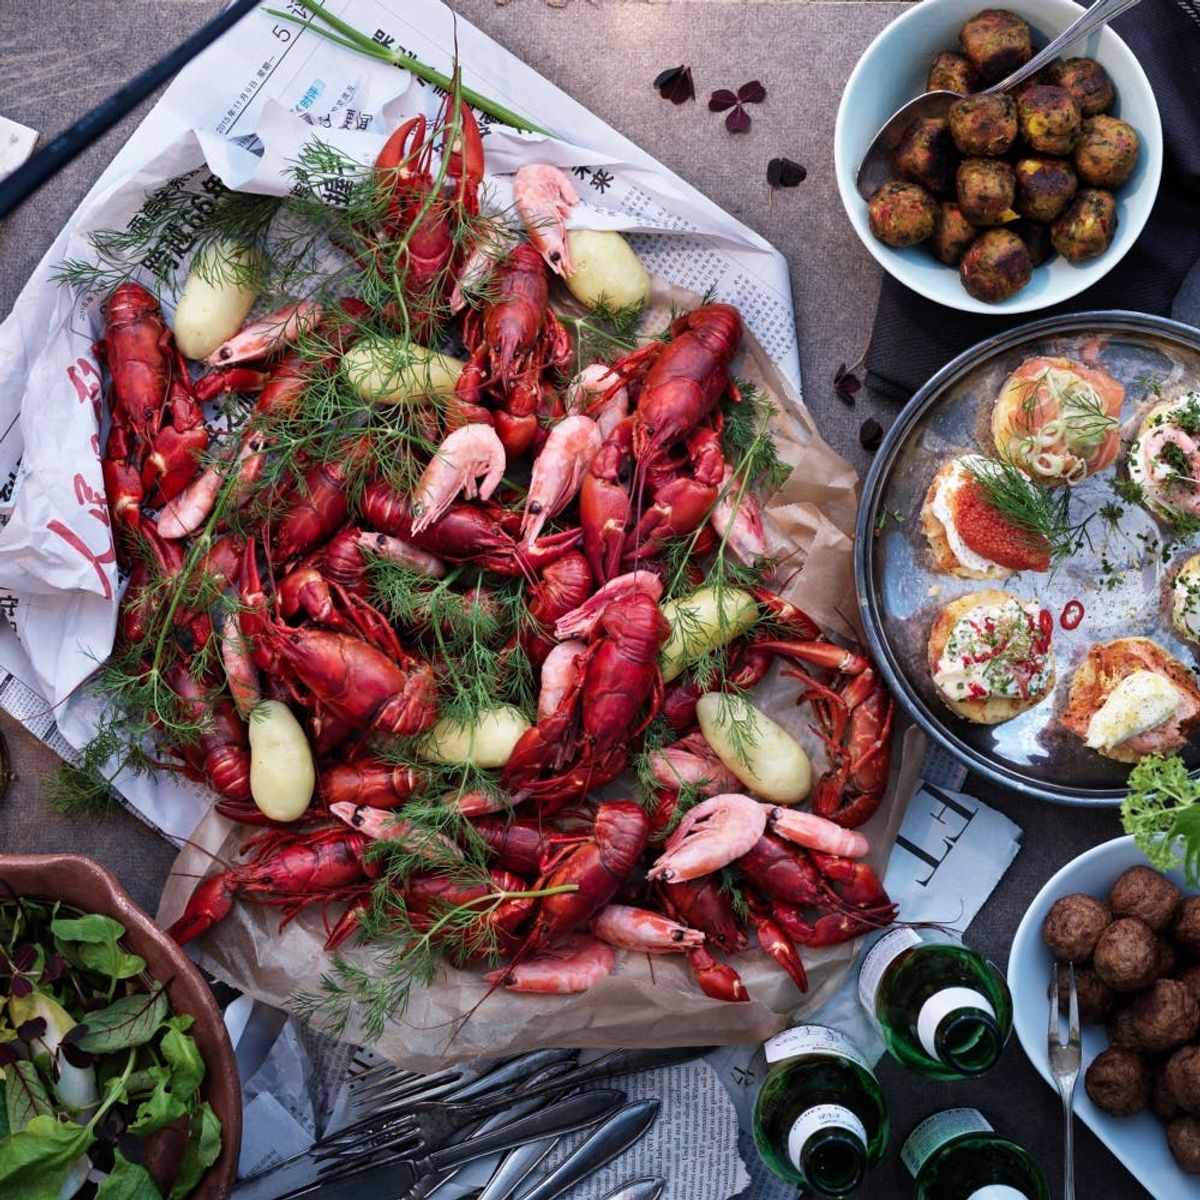 Celebrate Summer’s End With IKEA’s Swedish Crayfish Party (+ a Cheese Pie Recipe!)